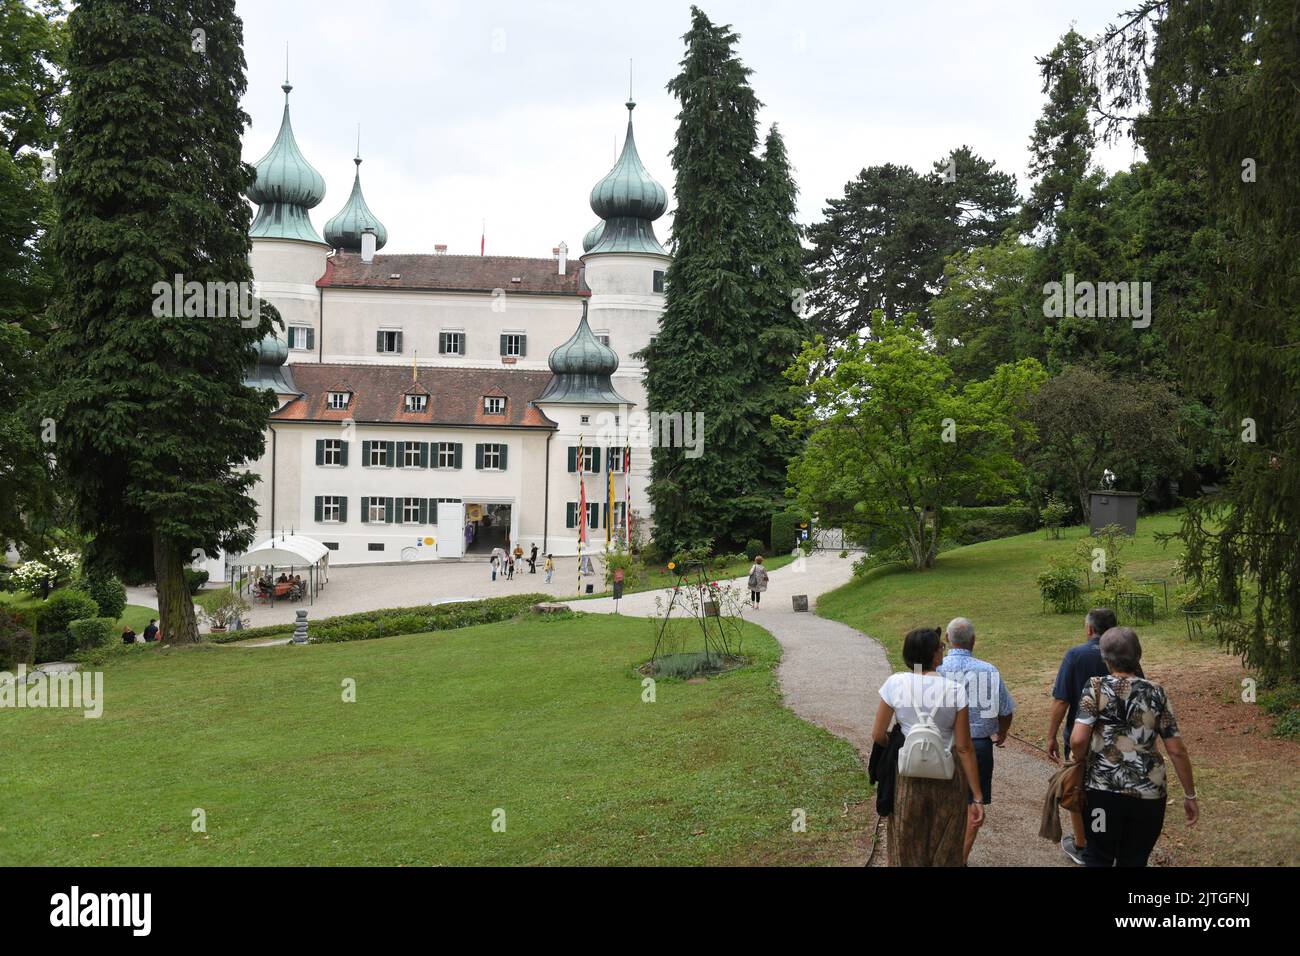 Castle Artstetten in Lower Austria with the tomb of the heir to the throne Franz Ferdinand, who was murdered in Sarajevo. The murder triggered World W Stock Photo